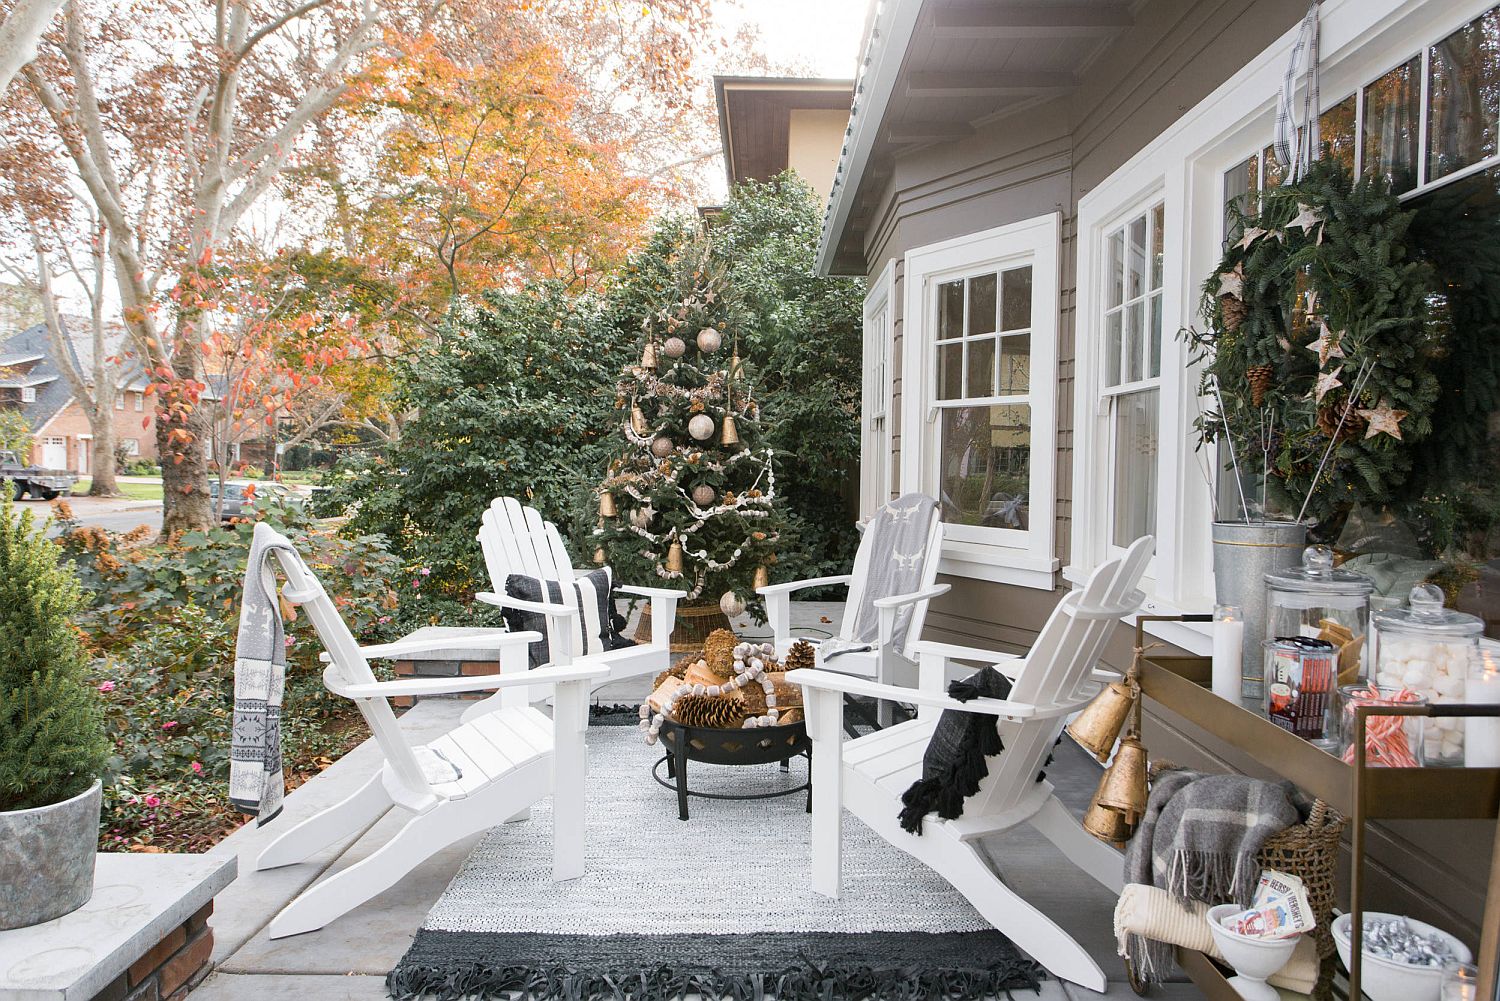 Bring the Holiday Season celebration to the front porch with some chairs and a Christmas tree in the corner